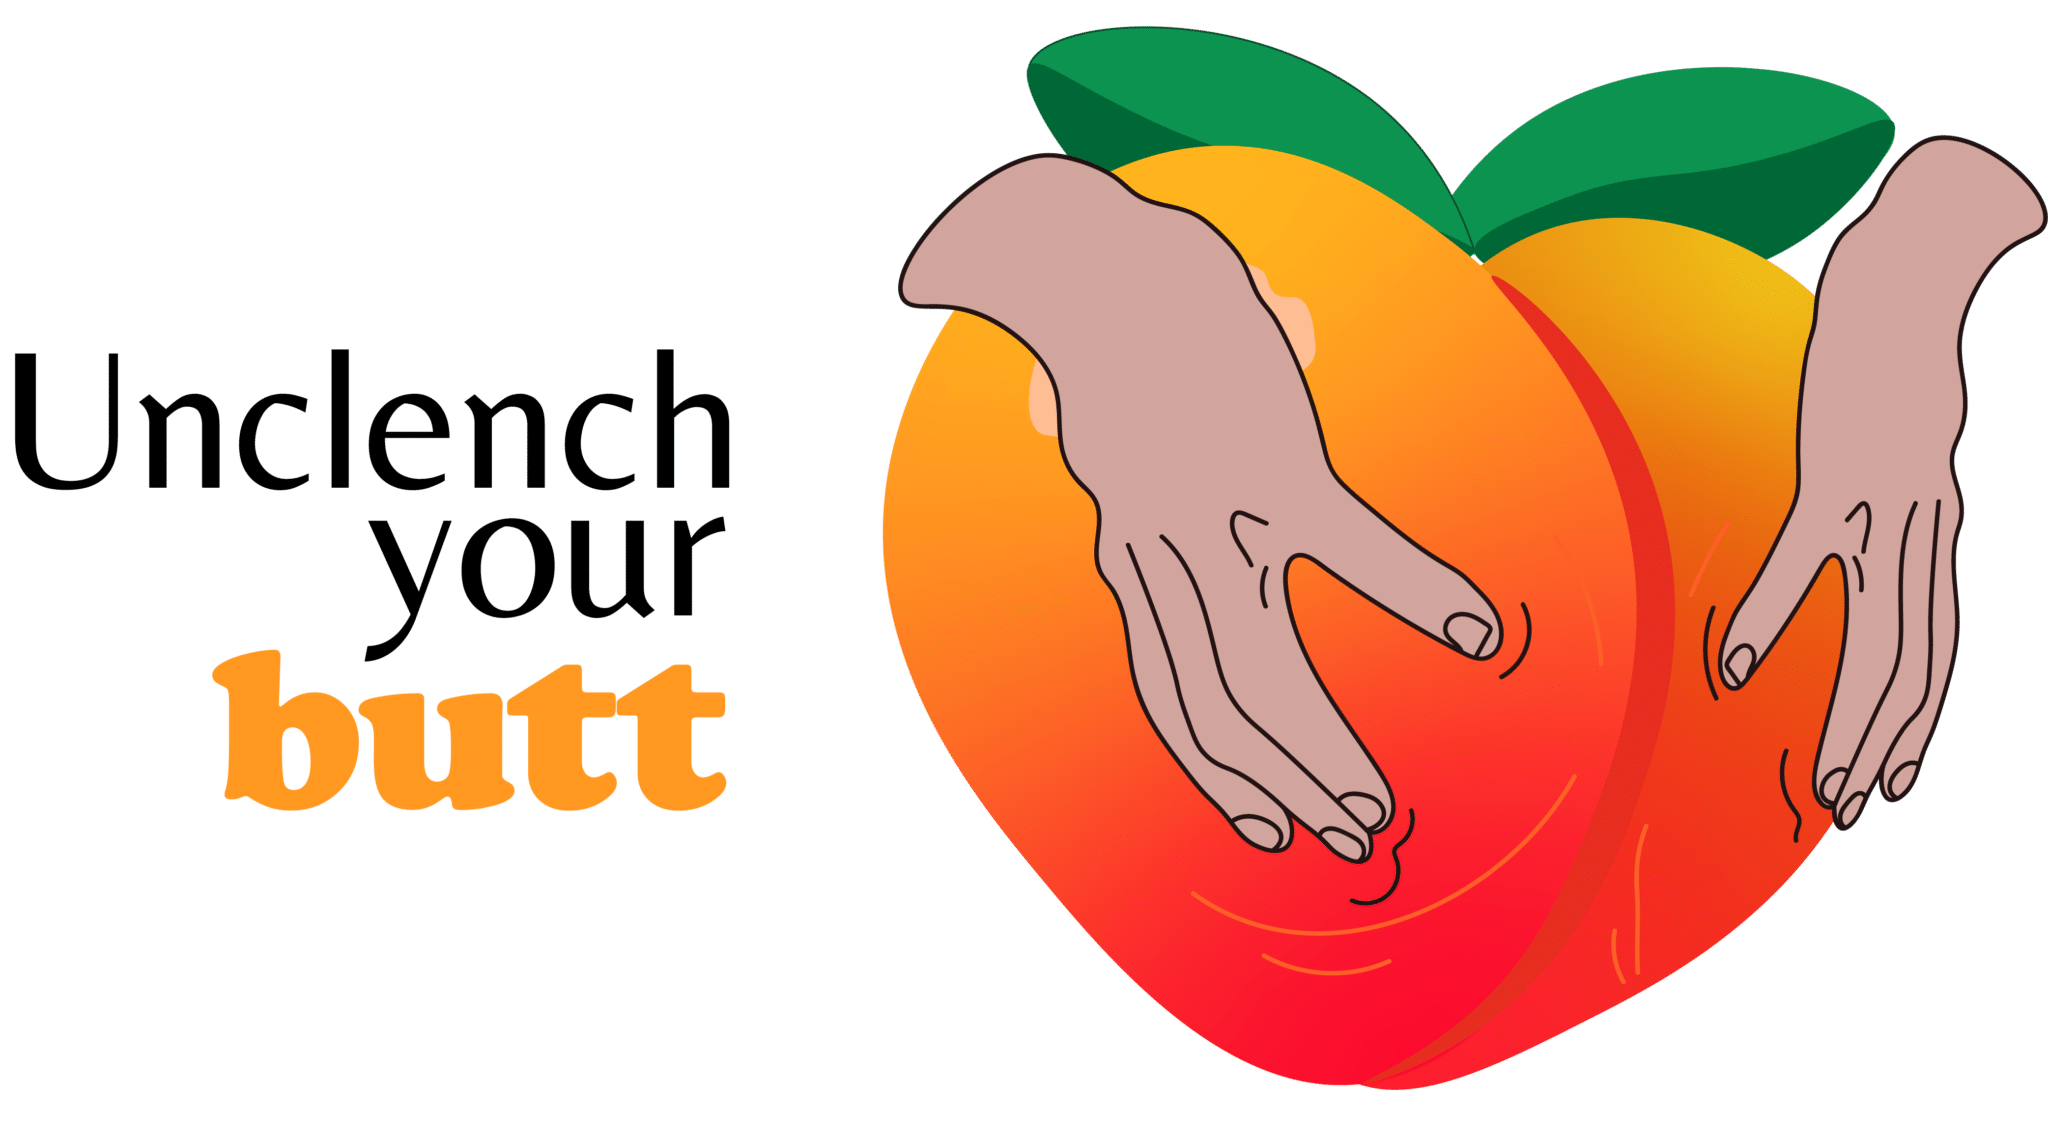 illustration of a peach with text: unclench your butt